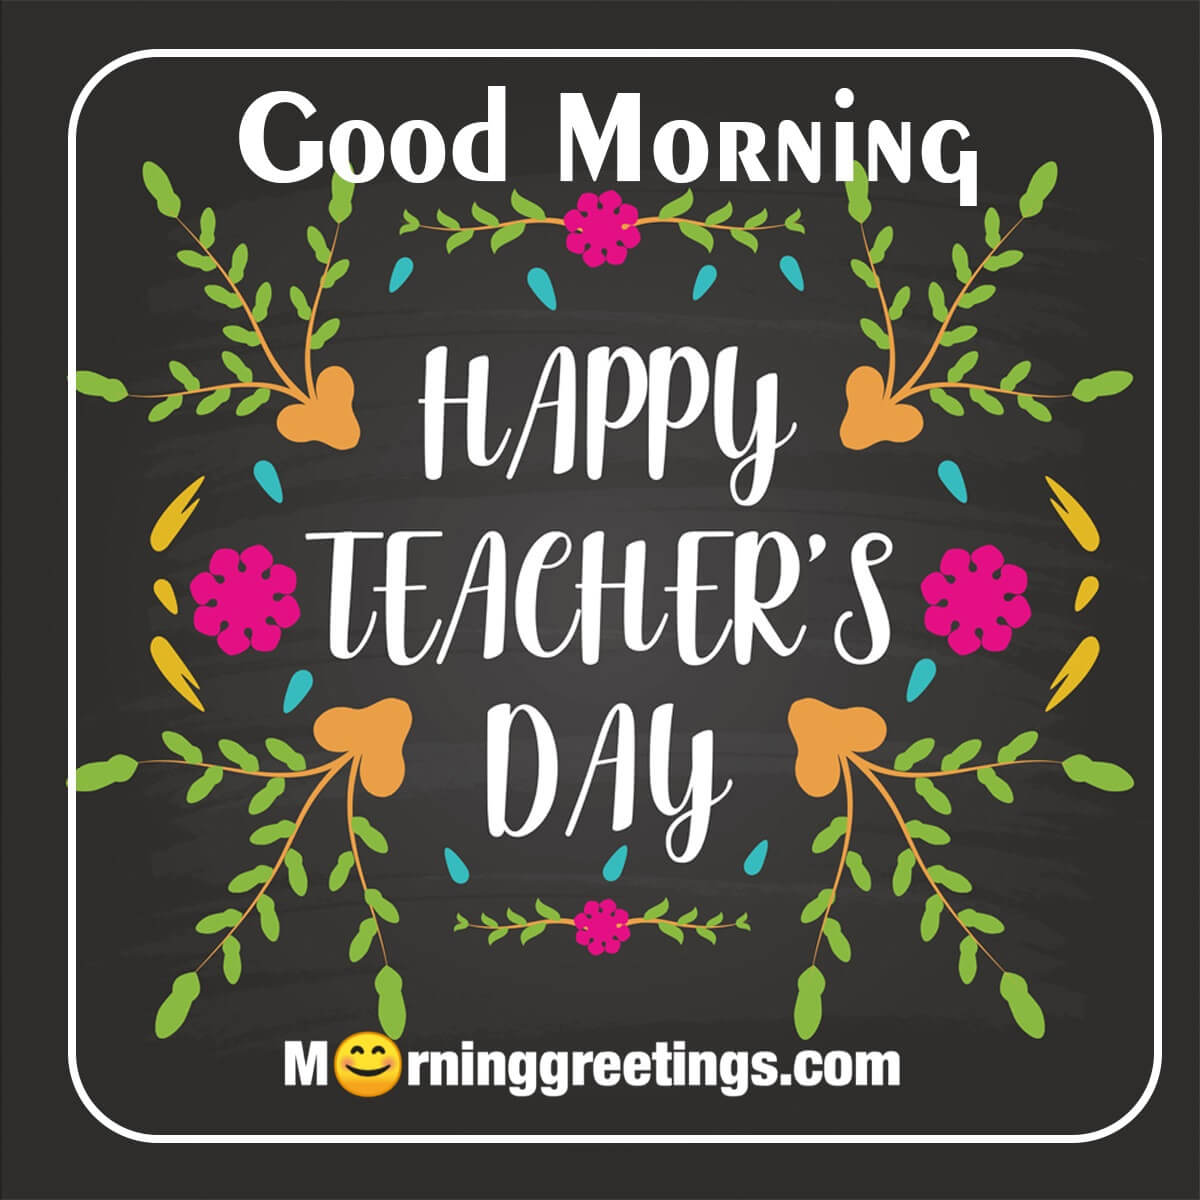 Good Morning Happy Teacher's Day Floral Image